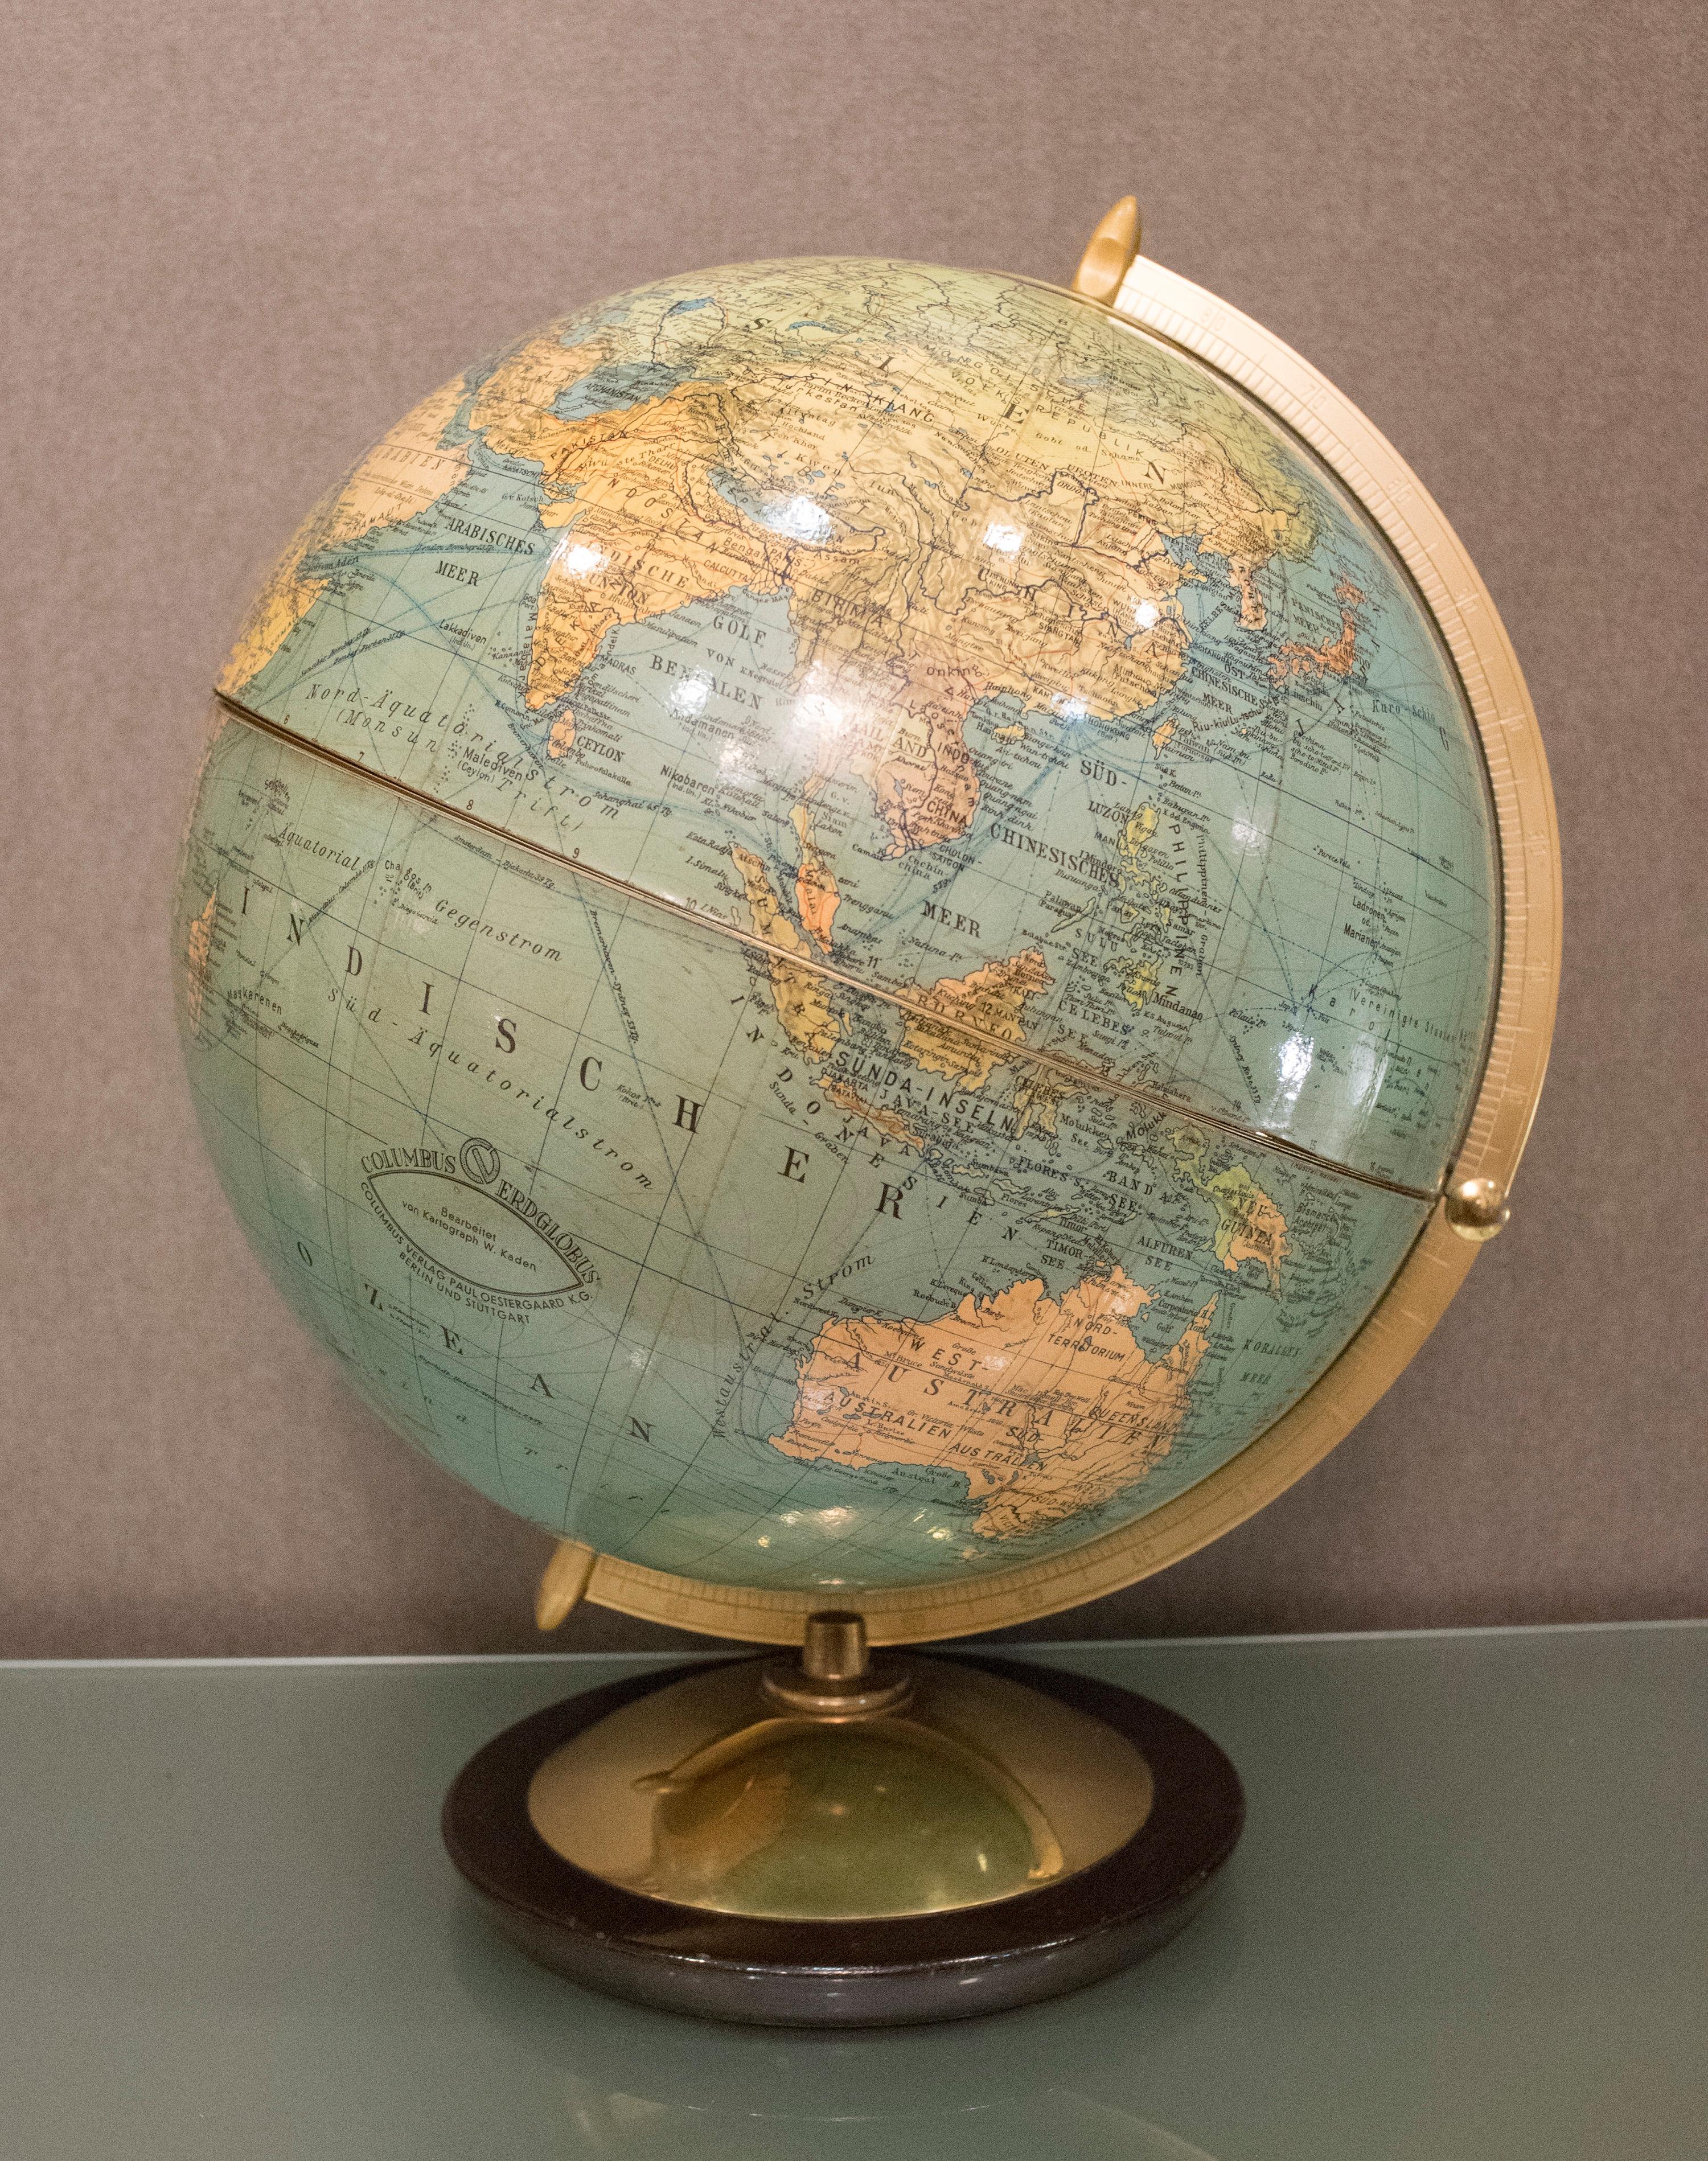 An amazing real earth globe from Columbus Verlag, Berlin, 1940 Bauhaus style, later transformed by Dejavu (French Maison) into a bar cabinet, it still has the original bottle and crystal glasses. Inside is lined in champagne color silk.
The